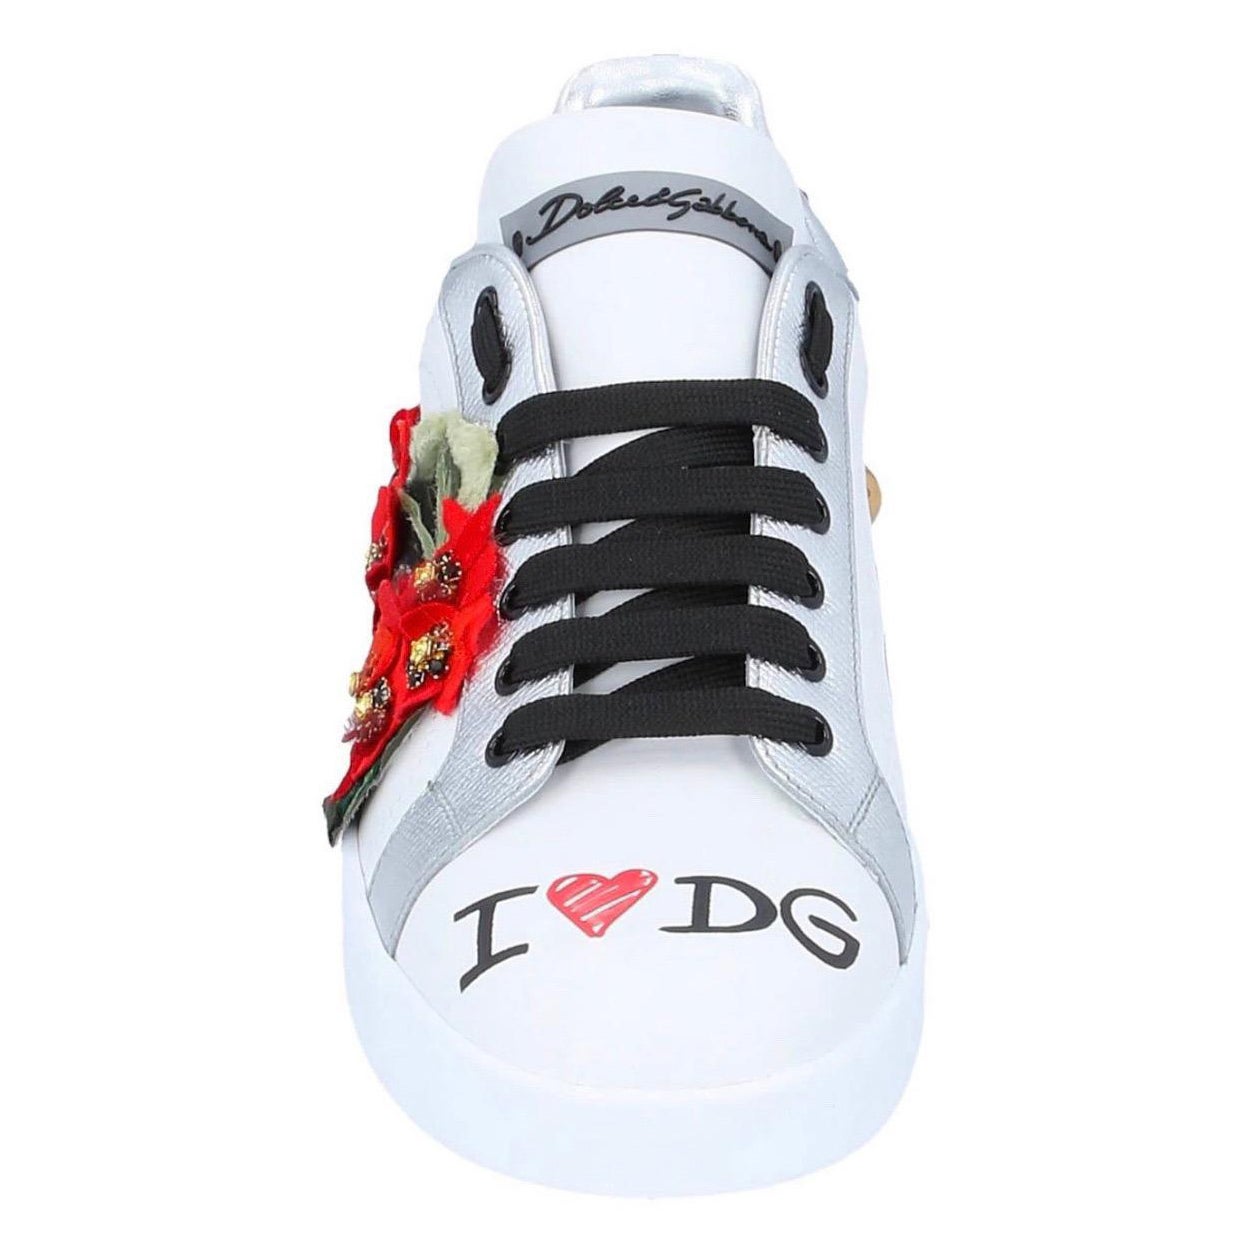 Dolce & Gabbana white leather Portofino lace up sneakers shoes  For Sale